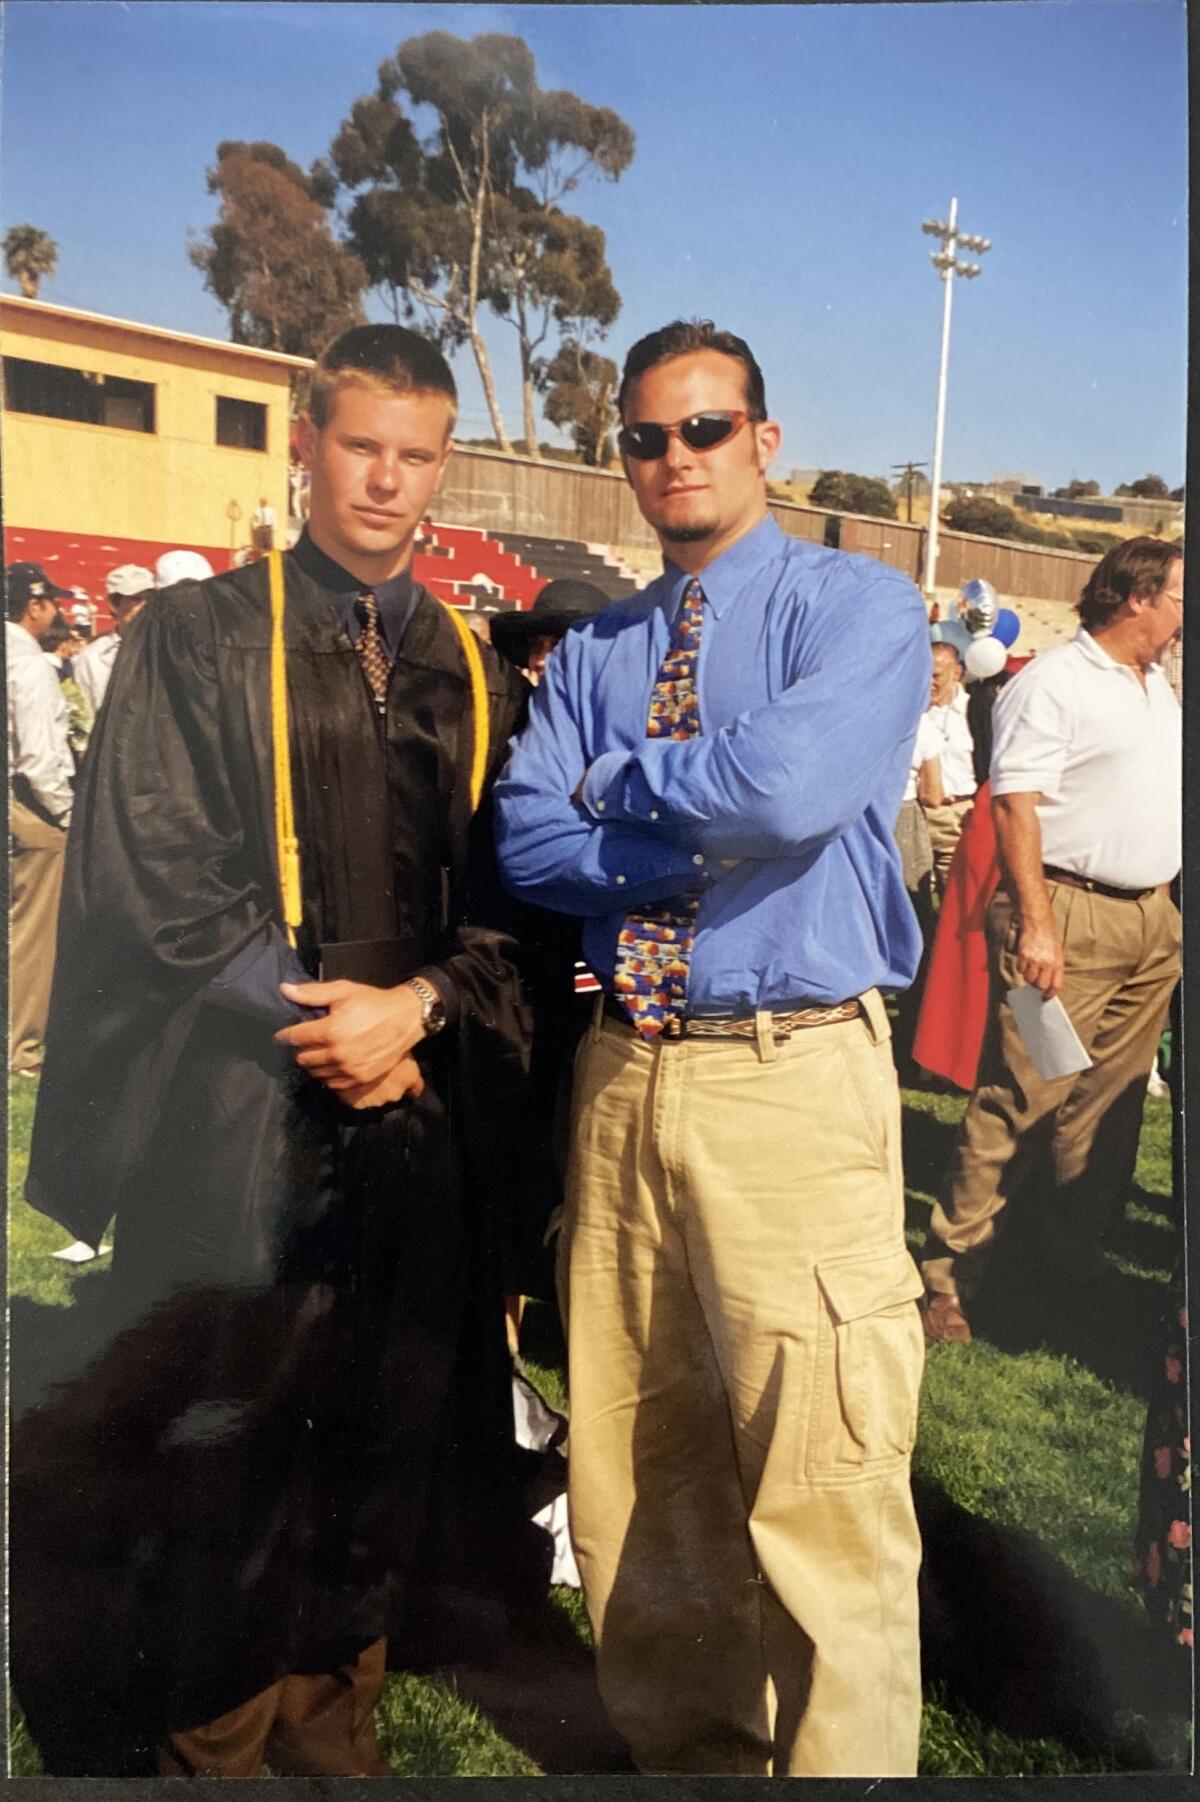 Brothers Griffin and Lucas Marquardt attend Griffin's 1999 graduation from La Jolla High School.